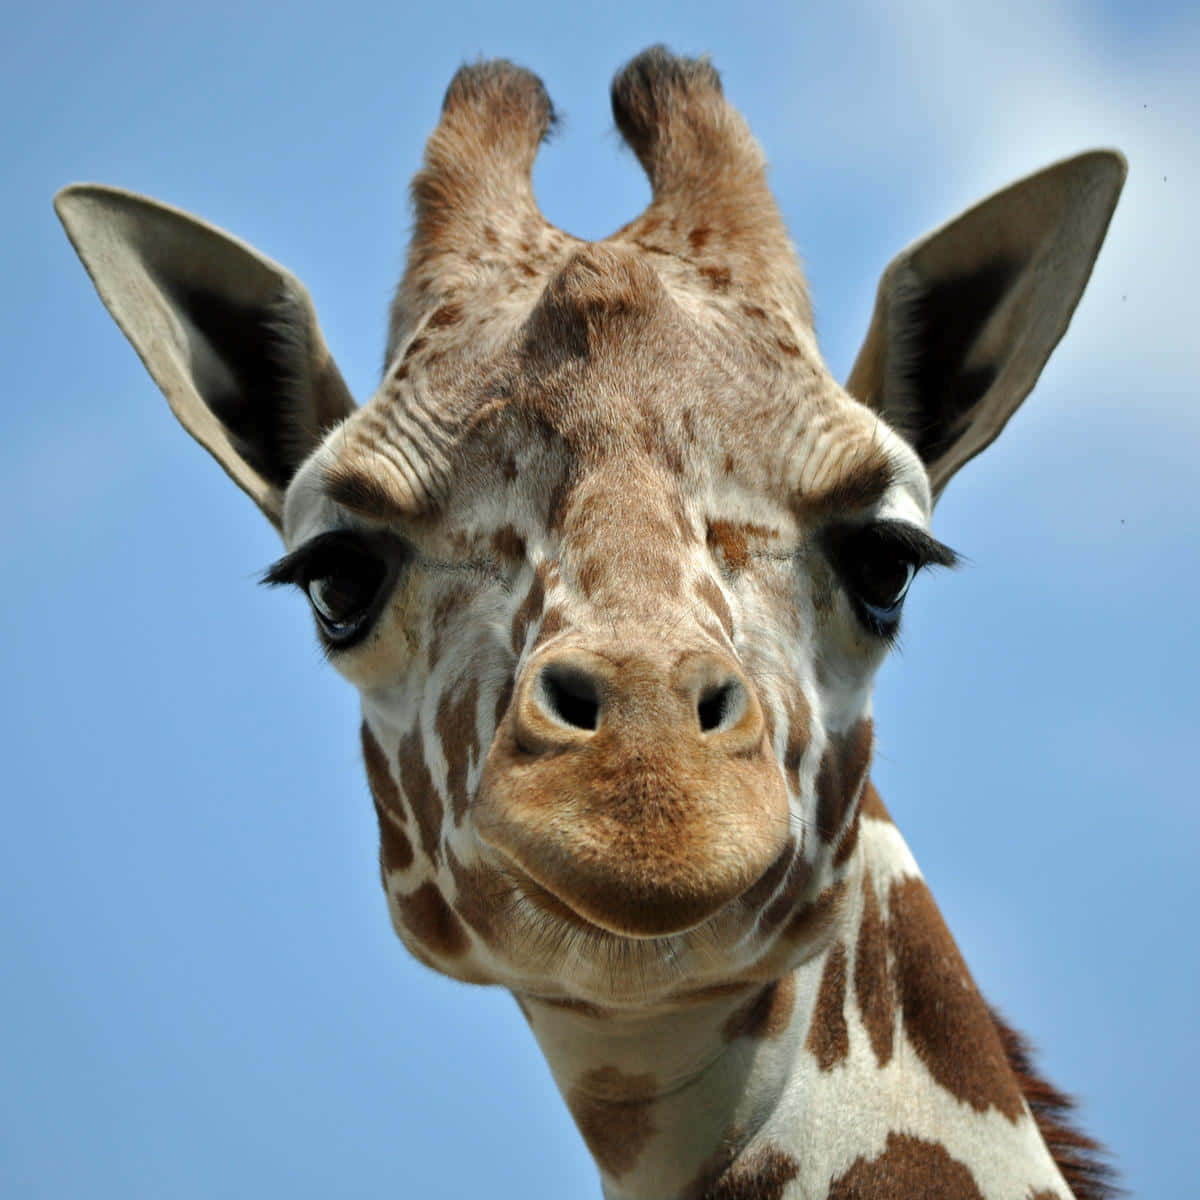 Giraffe Pictures